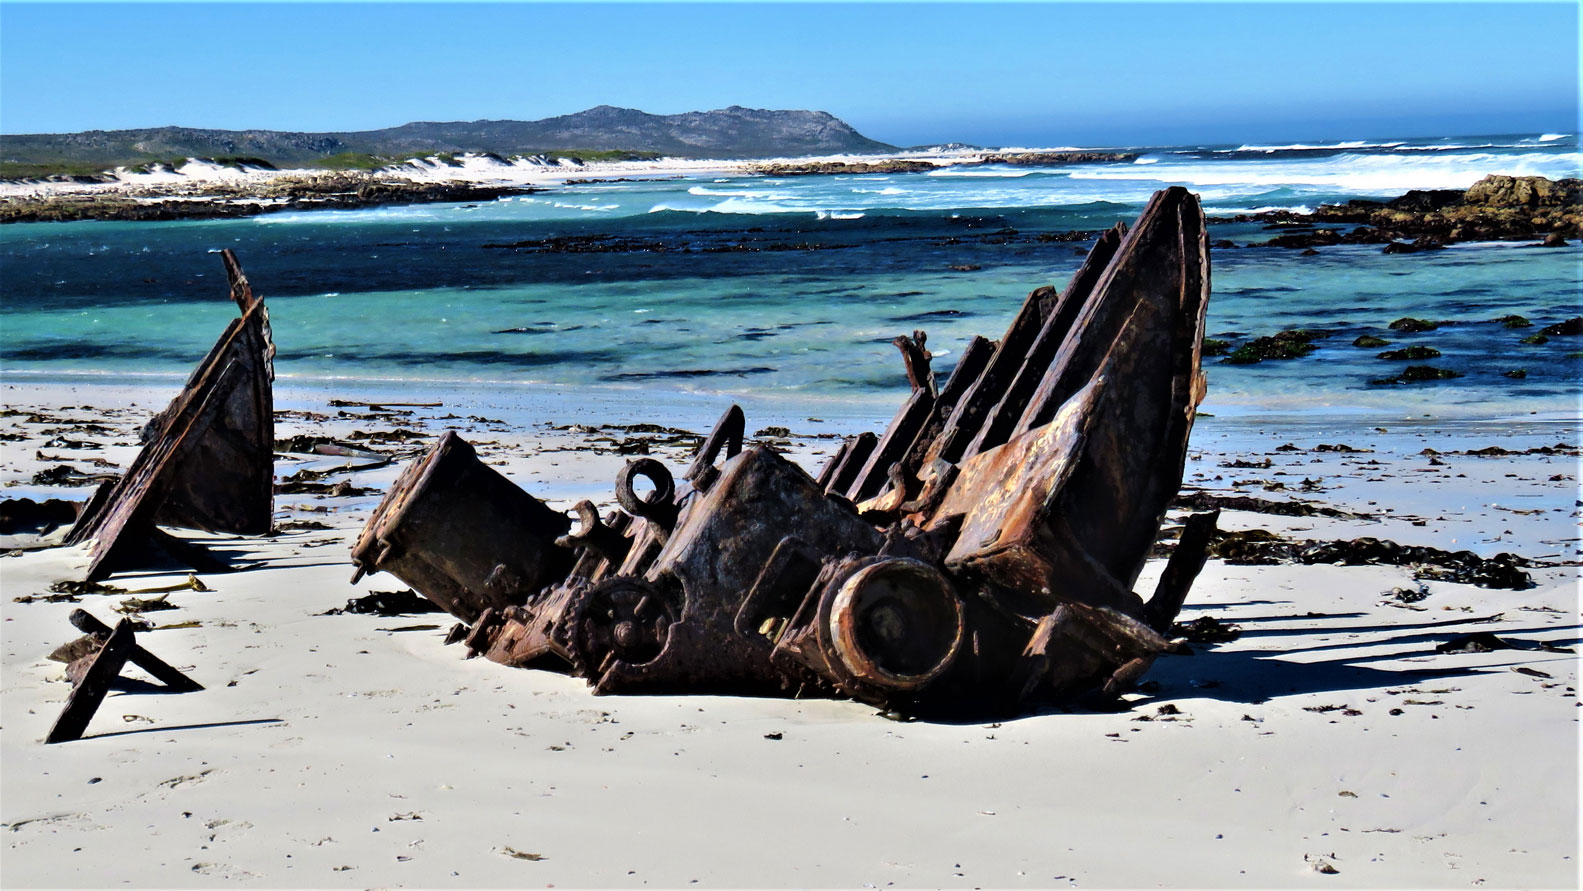 Olifantsbos Shipwreck Trail - Top 5 Hiking Trails in Cape Town